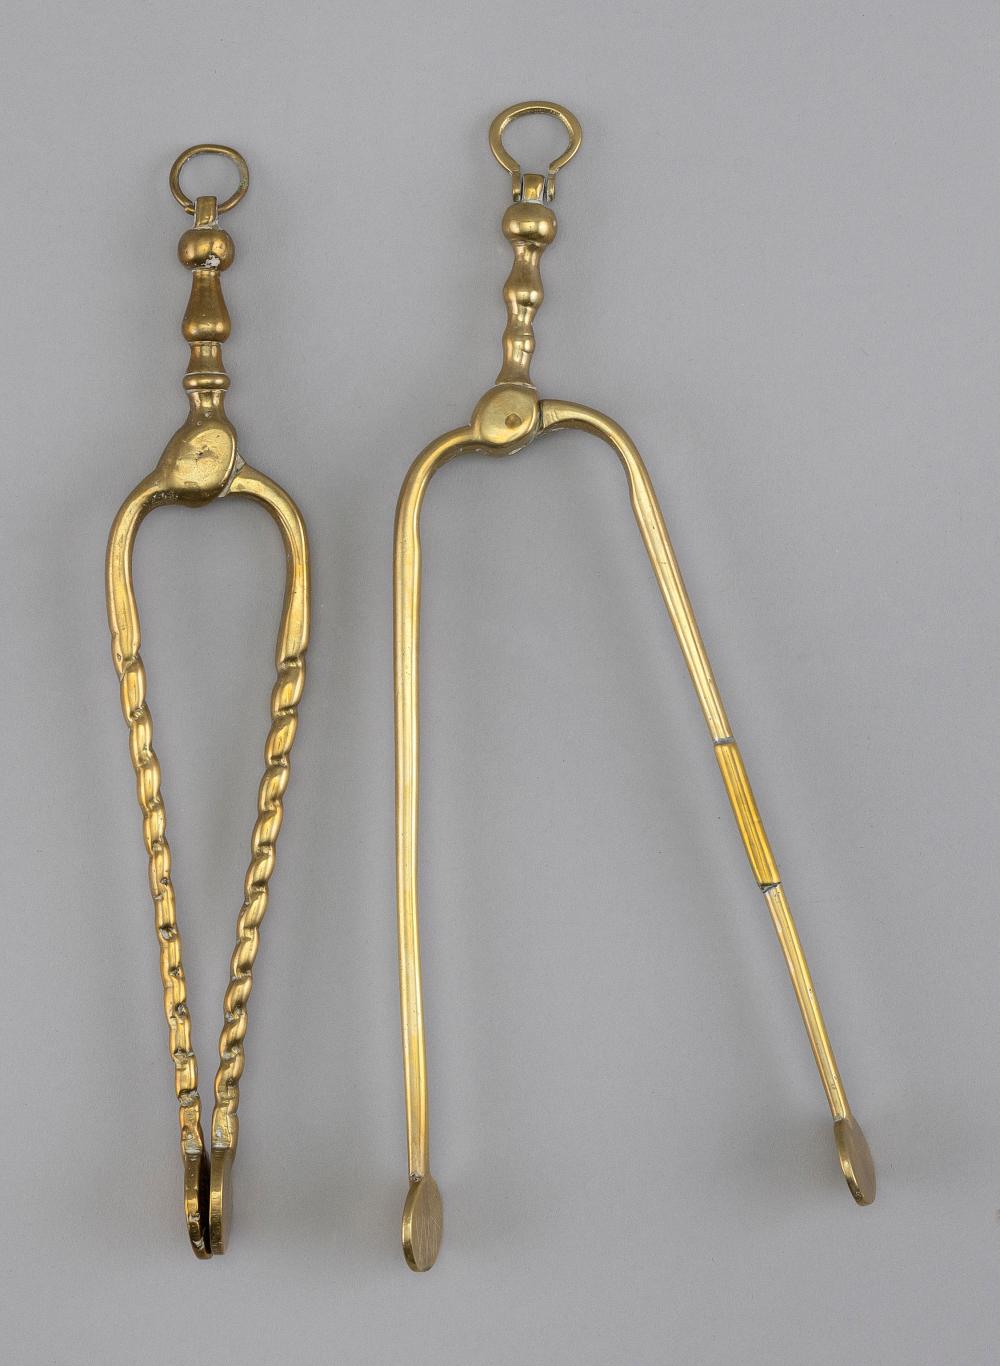 TWO PAIRS OF BRASS PIPE TONGS 18TH